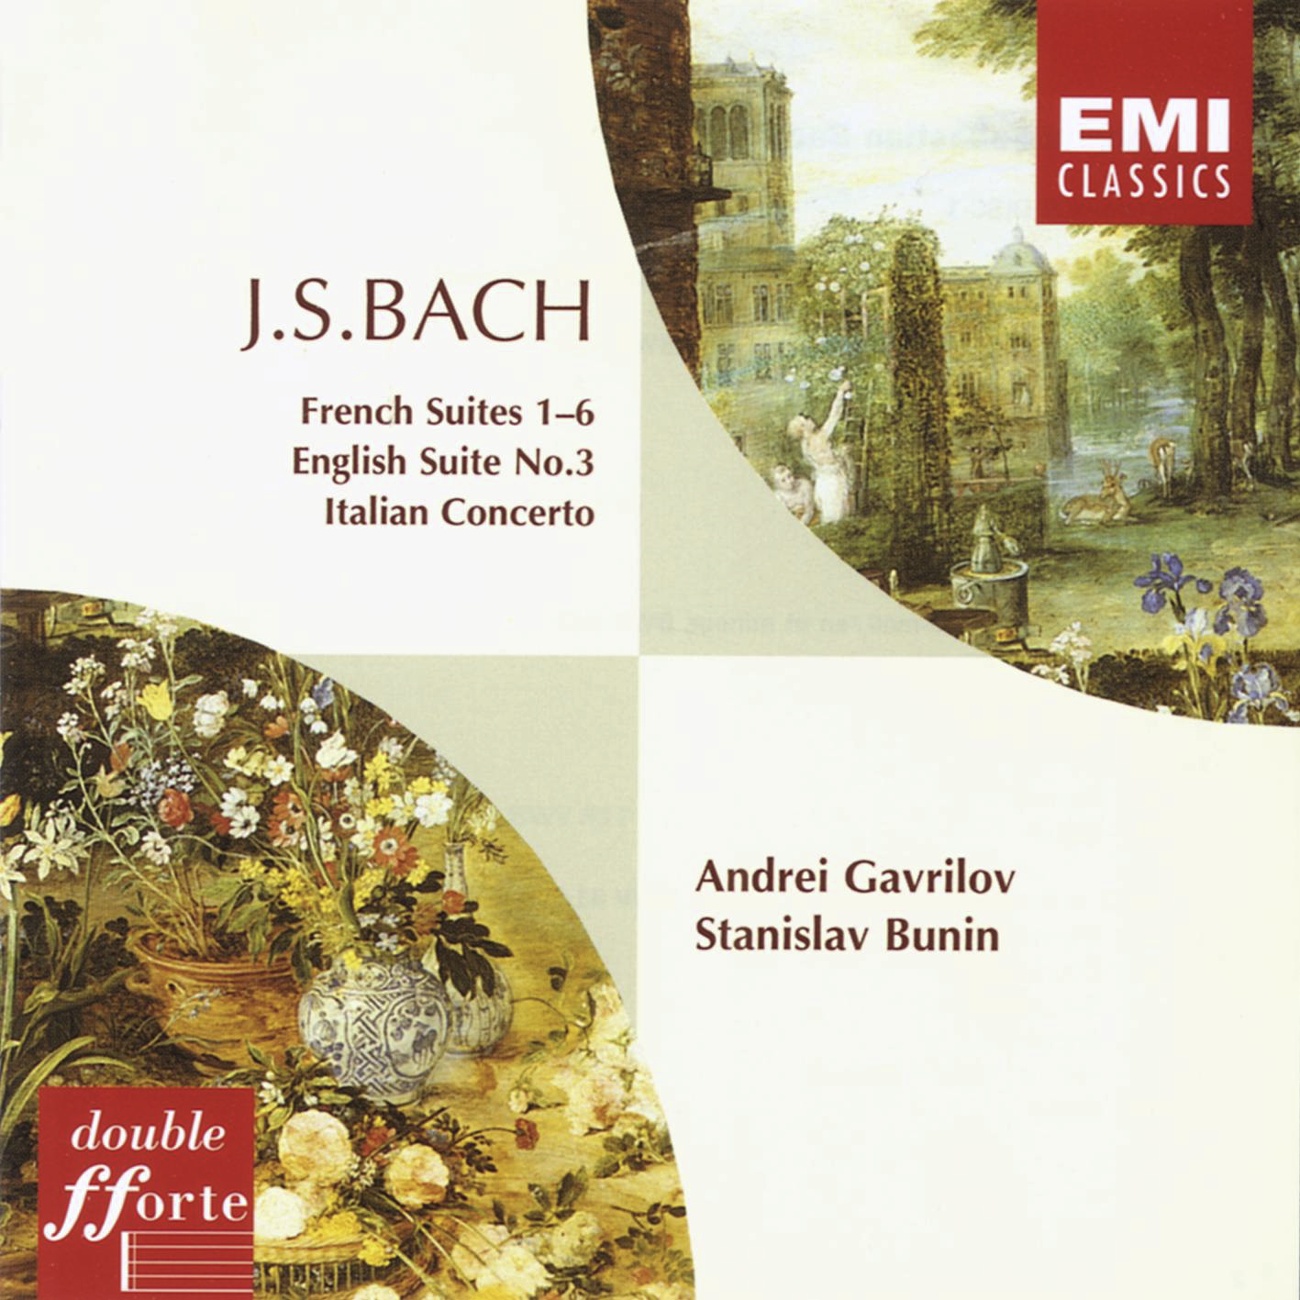 BACH: FRENCH SUITE 4 IN E FLAT, BWV 815: III. SARABANDE